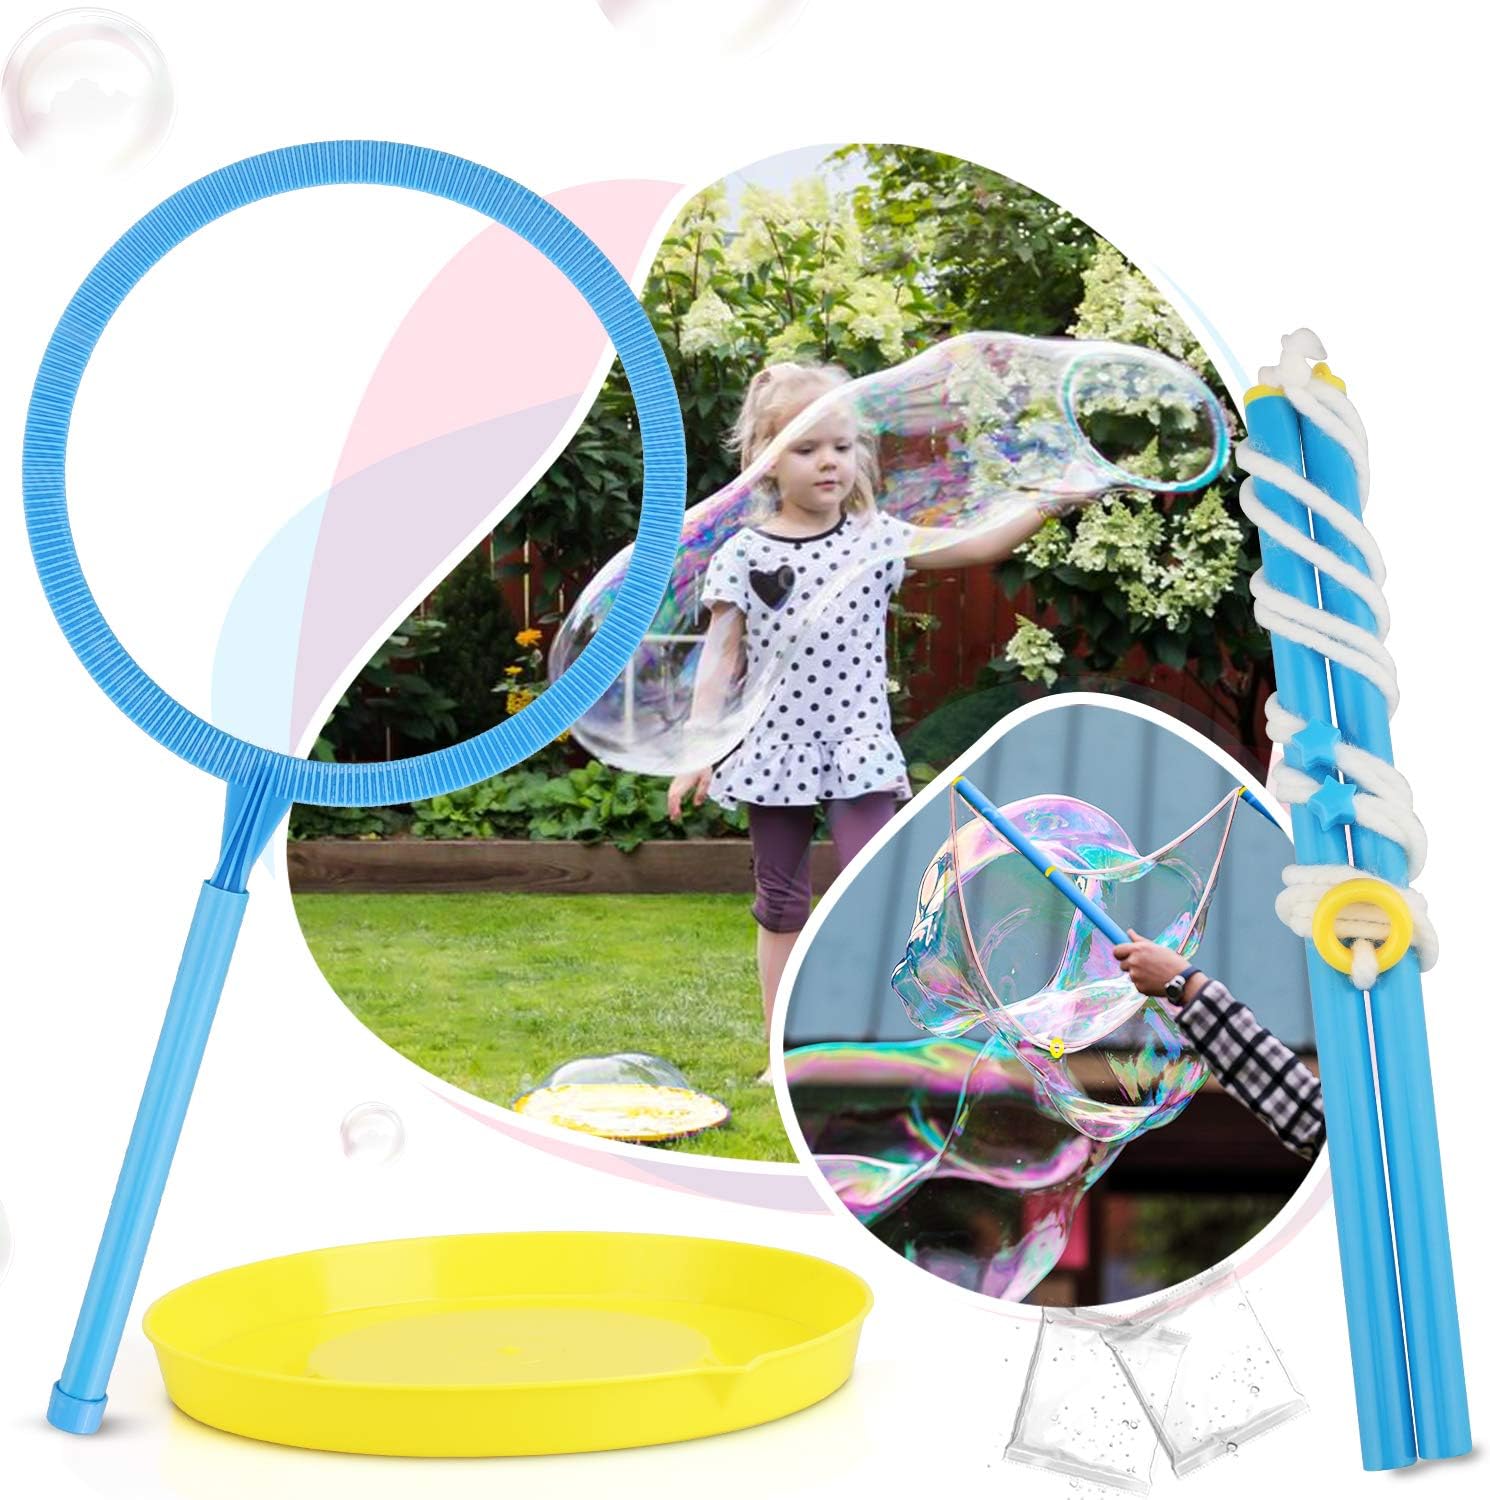 Toy Triple Giant Soap Bubble Maker Blower Rings Wand Tray Non-toxic Solution Set 